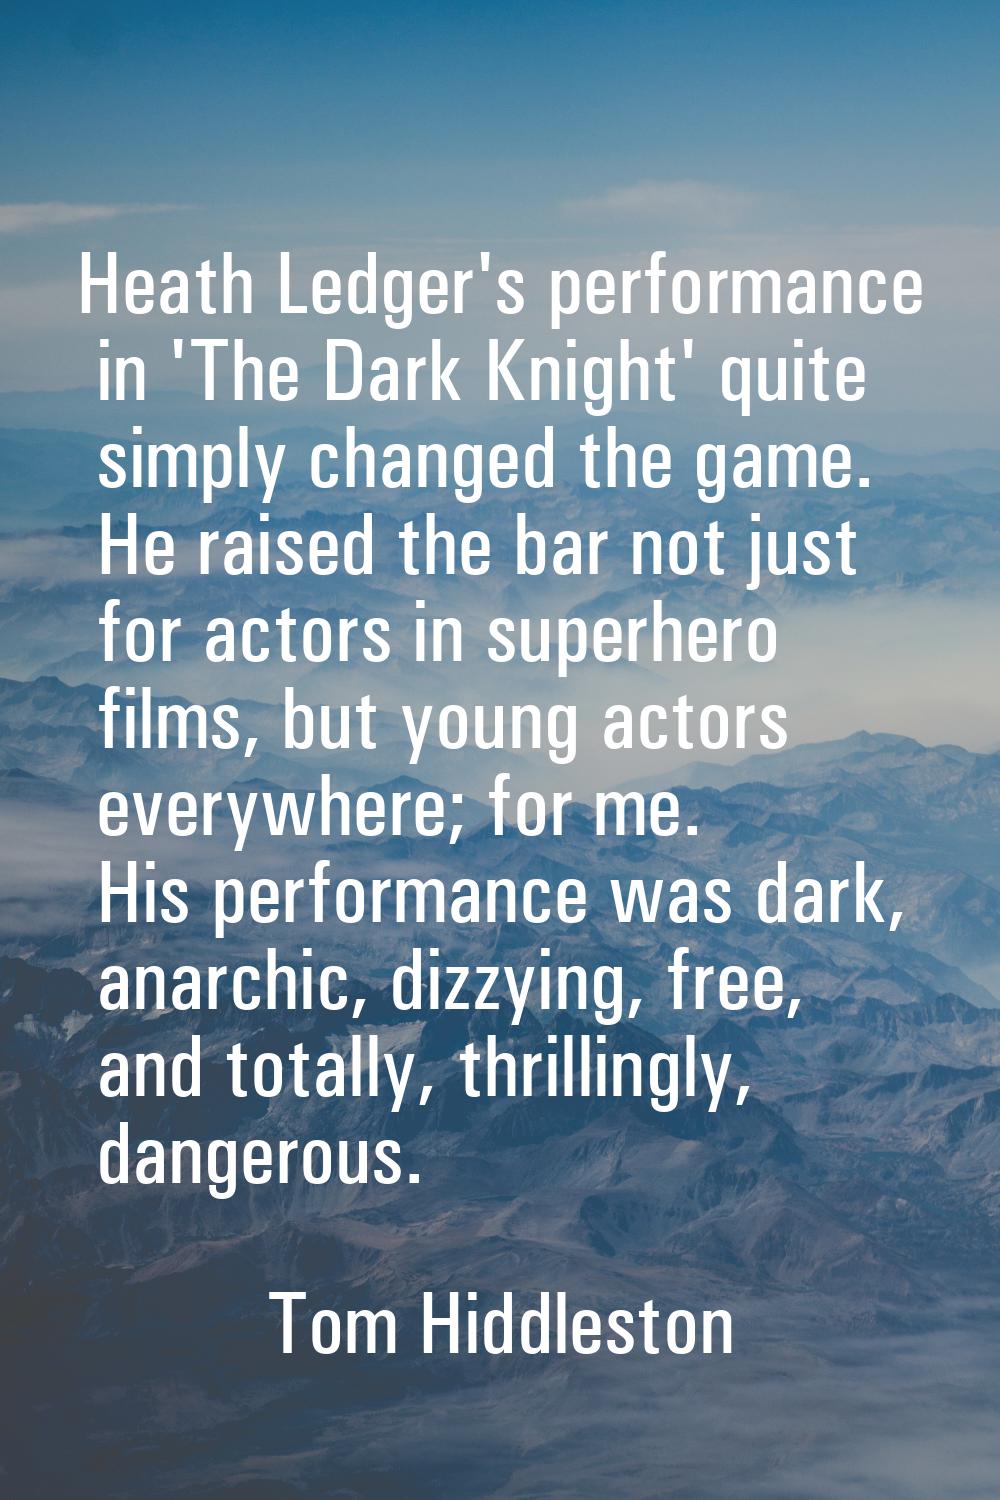 Heath Ledger's performance in 'The Dark Knight' quite simply changed the game. He raised the bar no